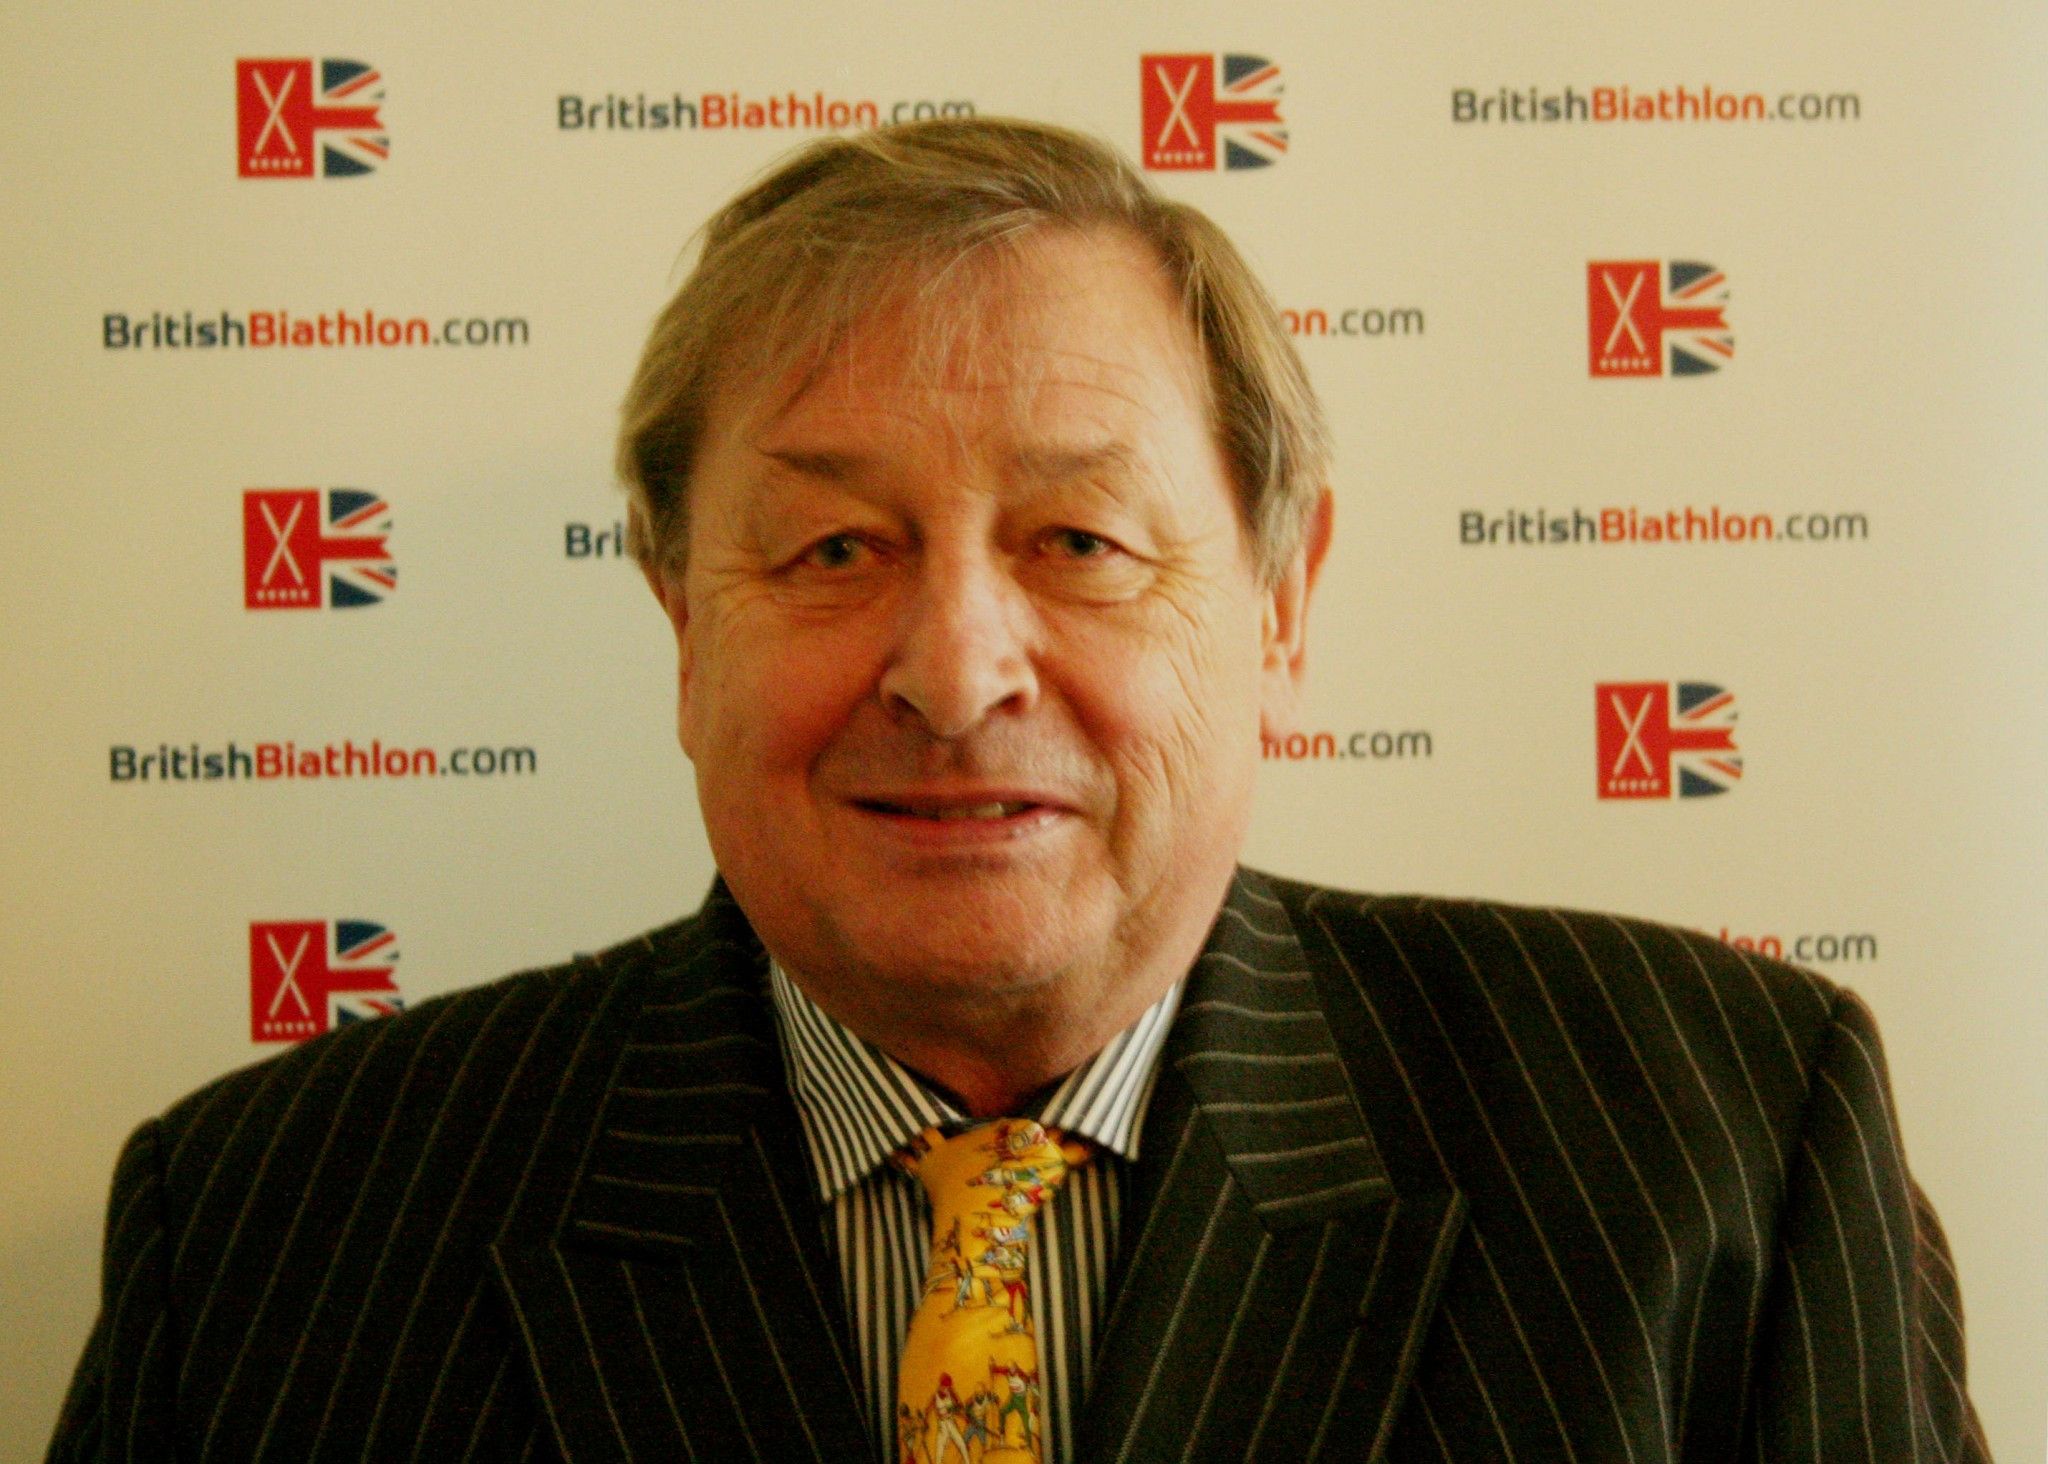 Mark Goodson is stepping down from the British Biathlon Union Board after more than 20 years ©BBU